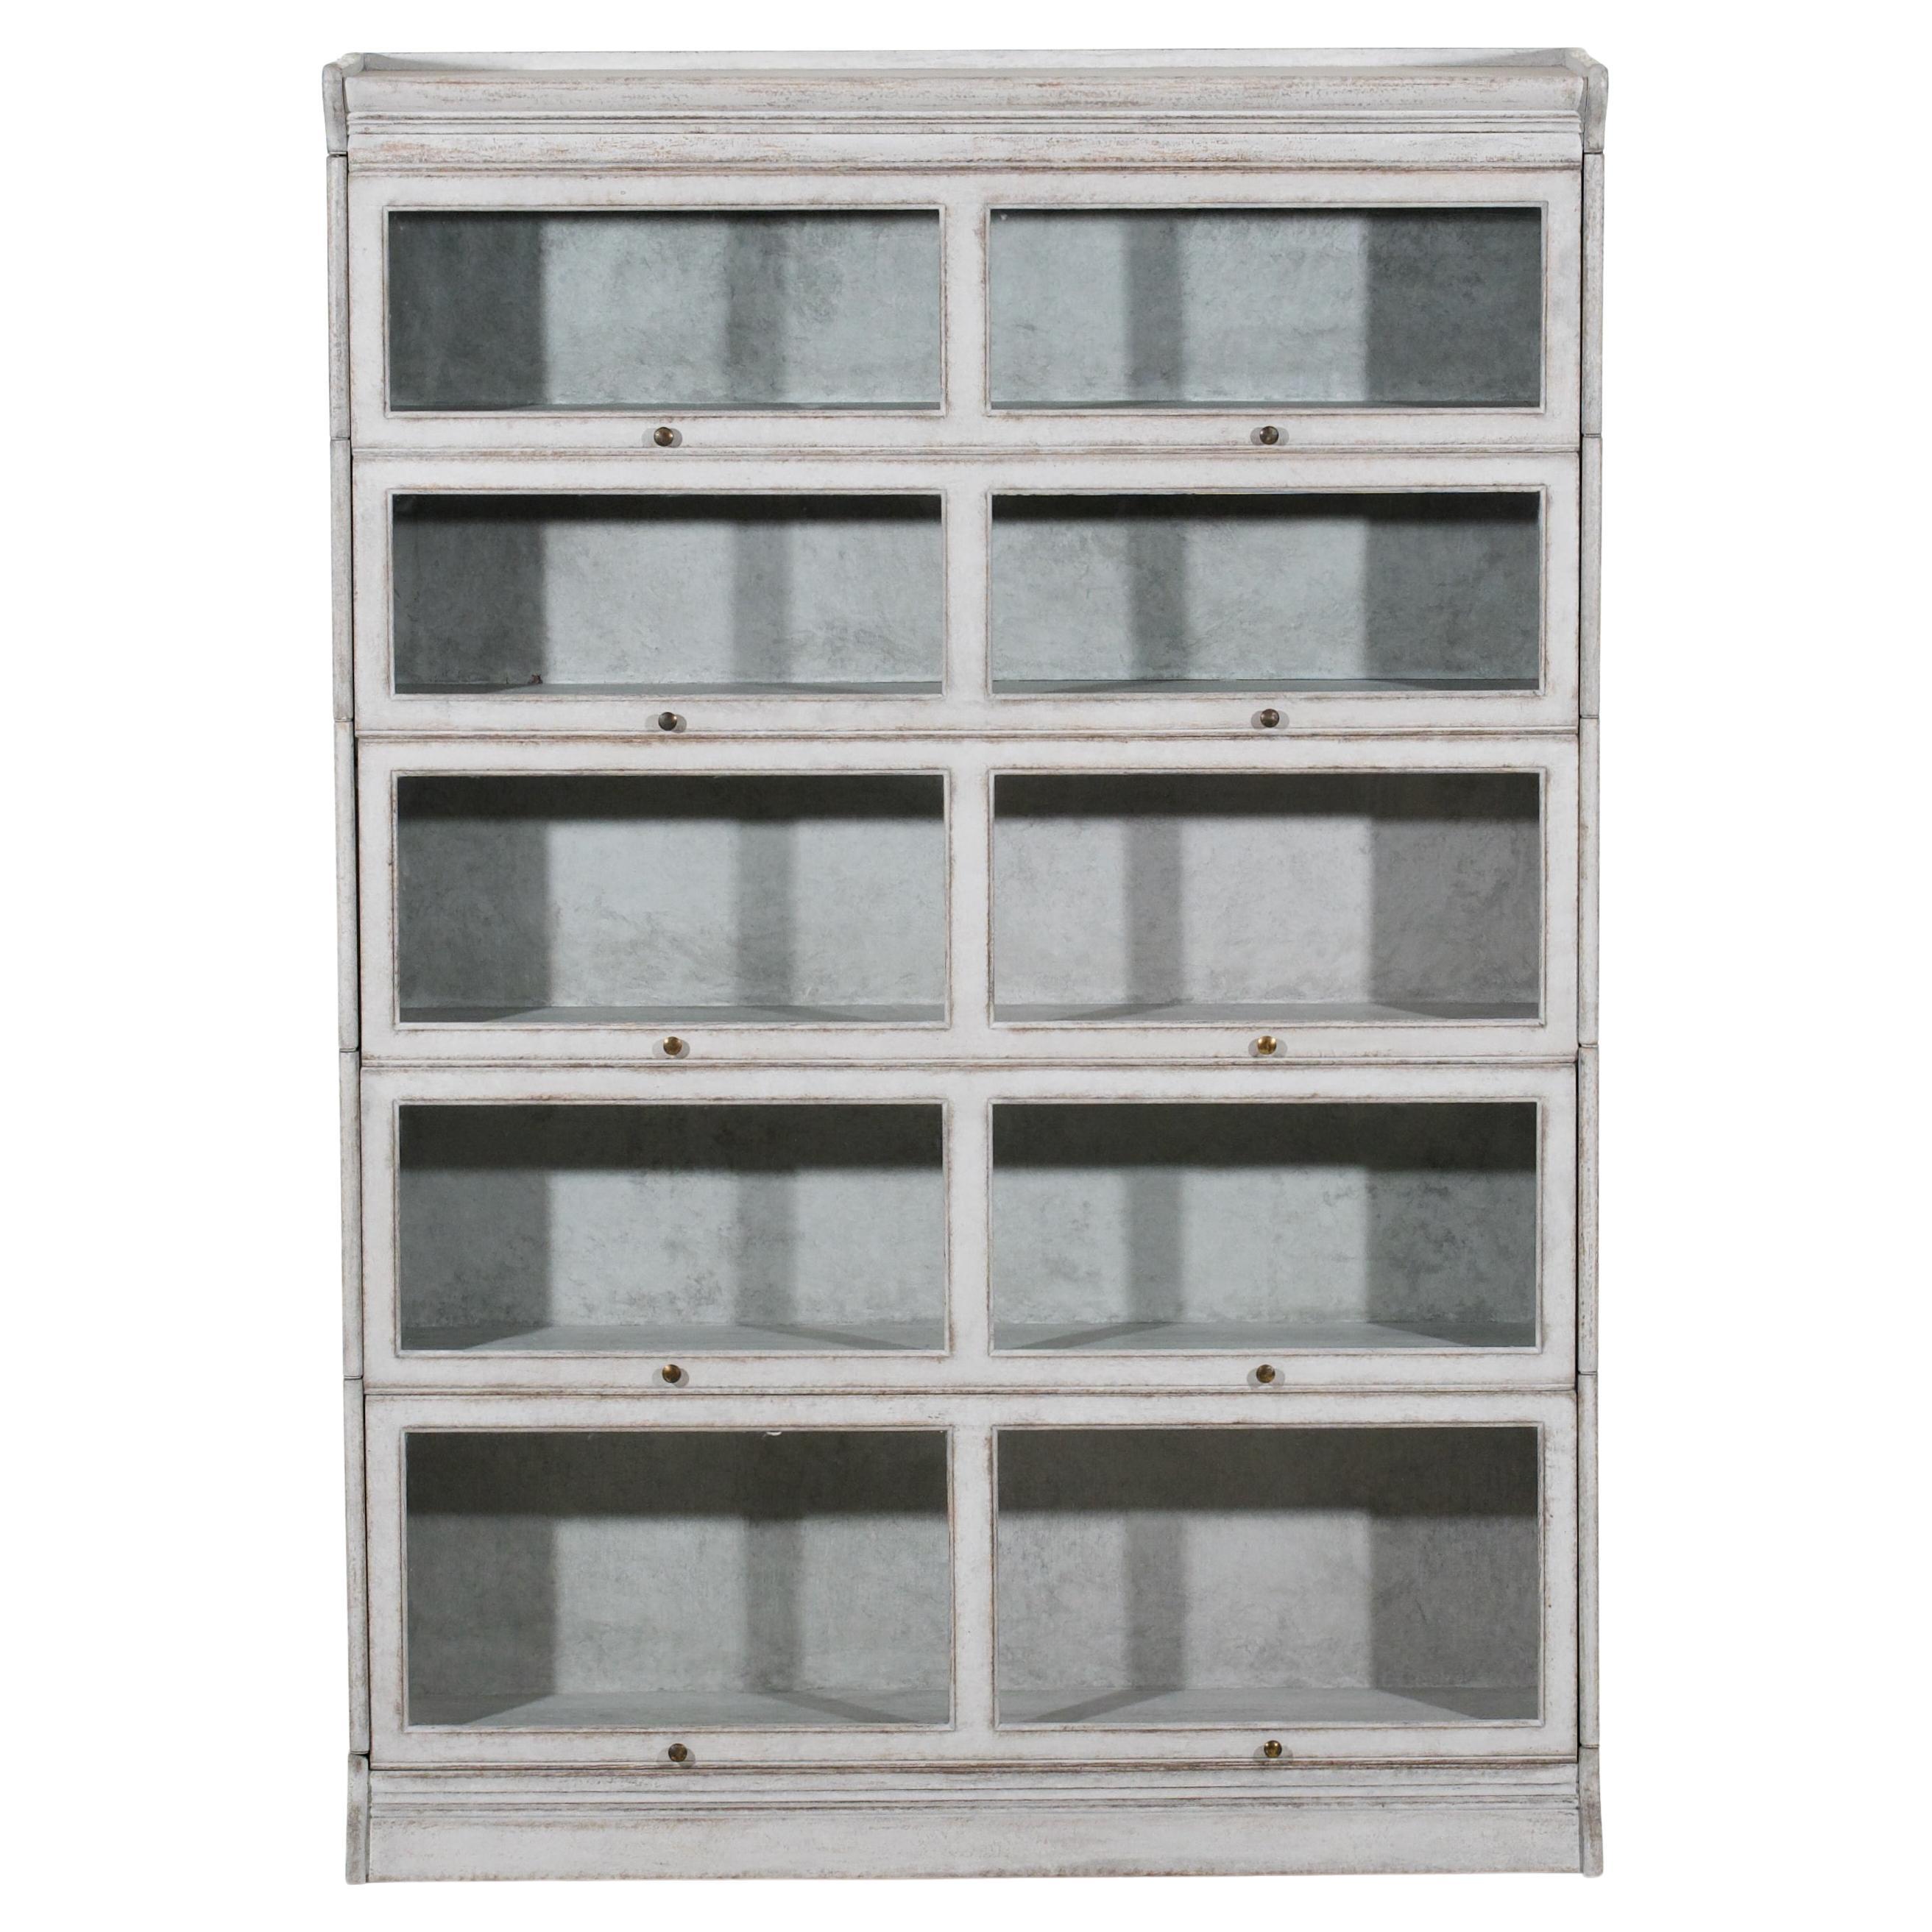 This Bookcase Is a Very Rare Swedish Piece from the Early 20th C For Sale